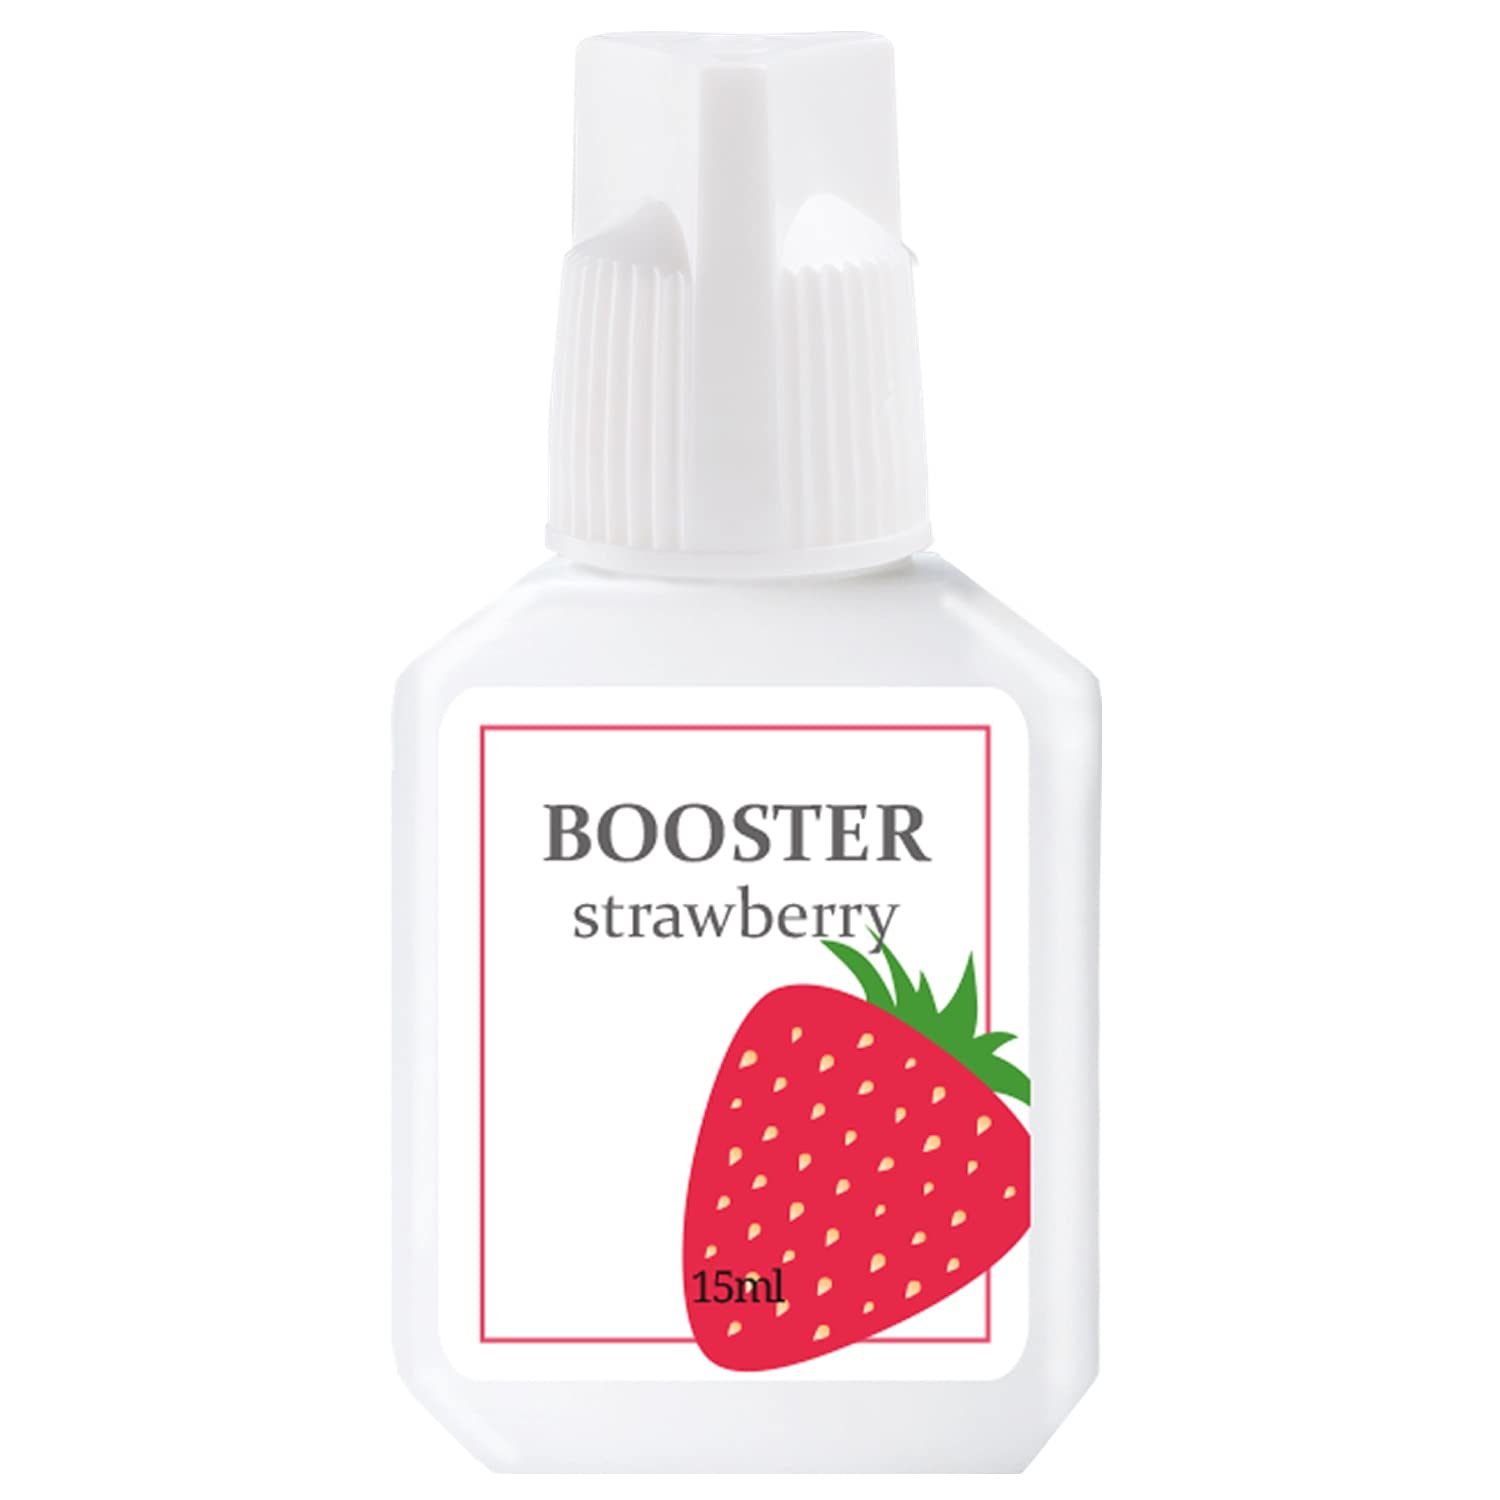 P-Beauty Cosmetic Accessories Sky Booster Eyelash Glue Enhancer | Amplifier Booster | Adhesive Enhancer for Eyelash Extension | Increases the Adhesion of Artificial Eyelashes (15 ml) (Sky Booster Strawberry), ‎sky strawberry